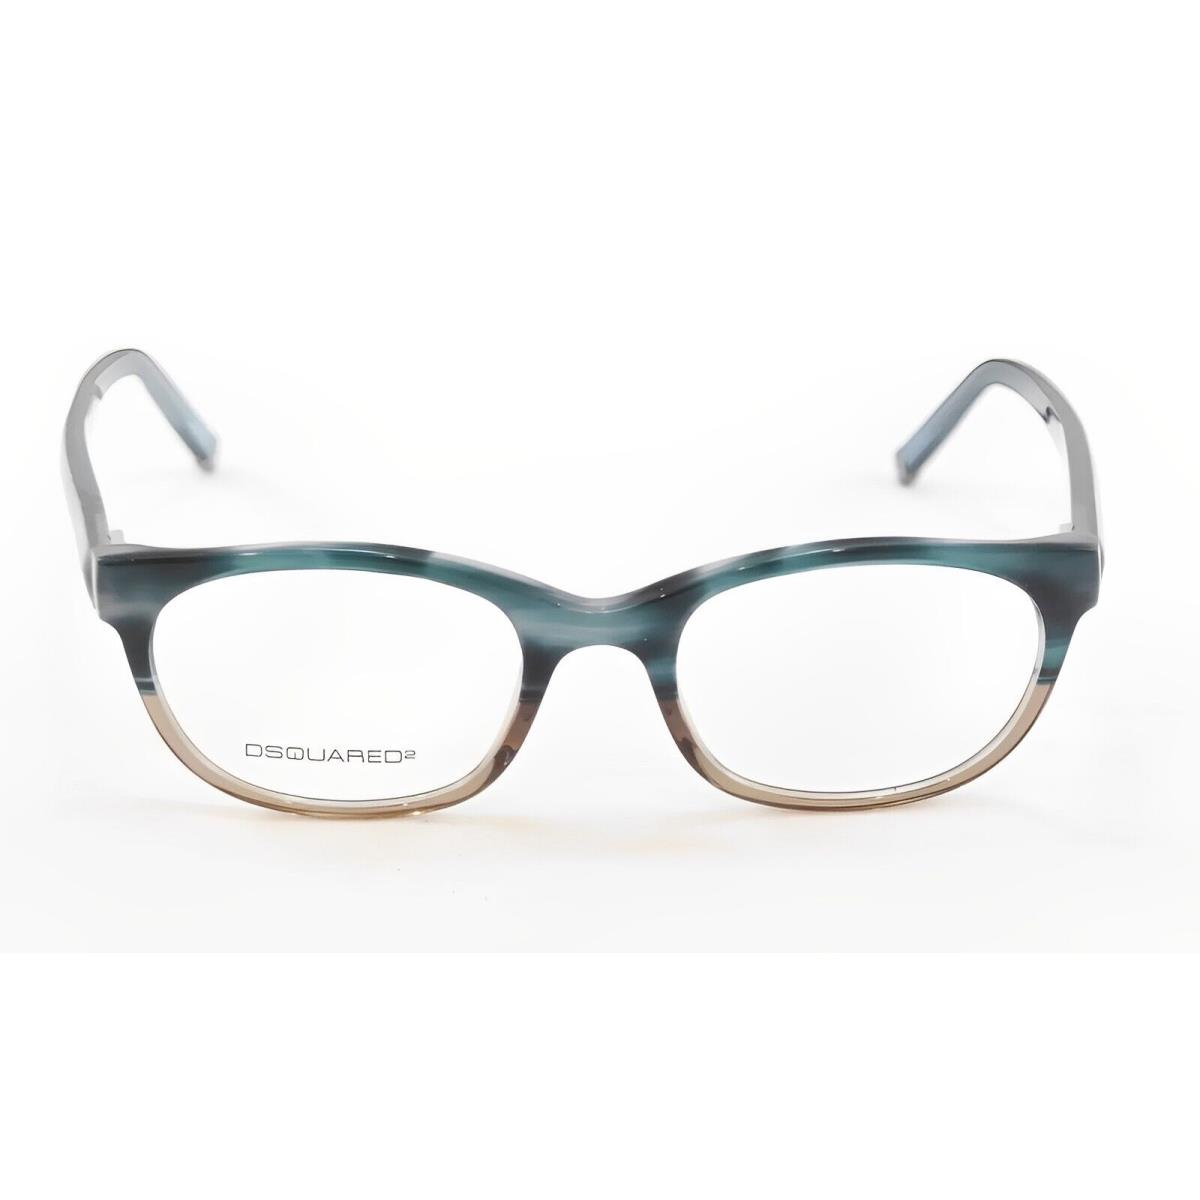 Dsquared2 Eyeglasses - DQ5041 065 - Blue to Beige 51-19-145